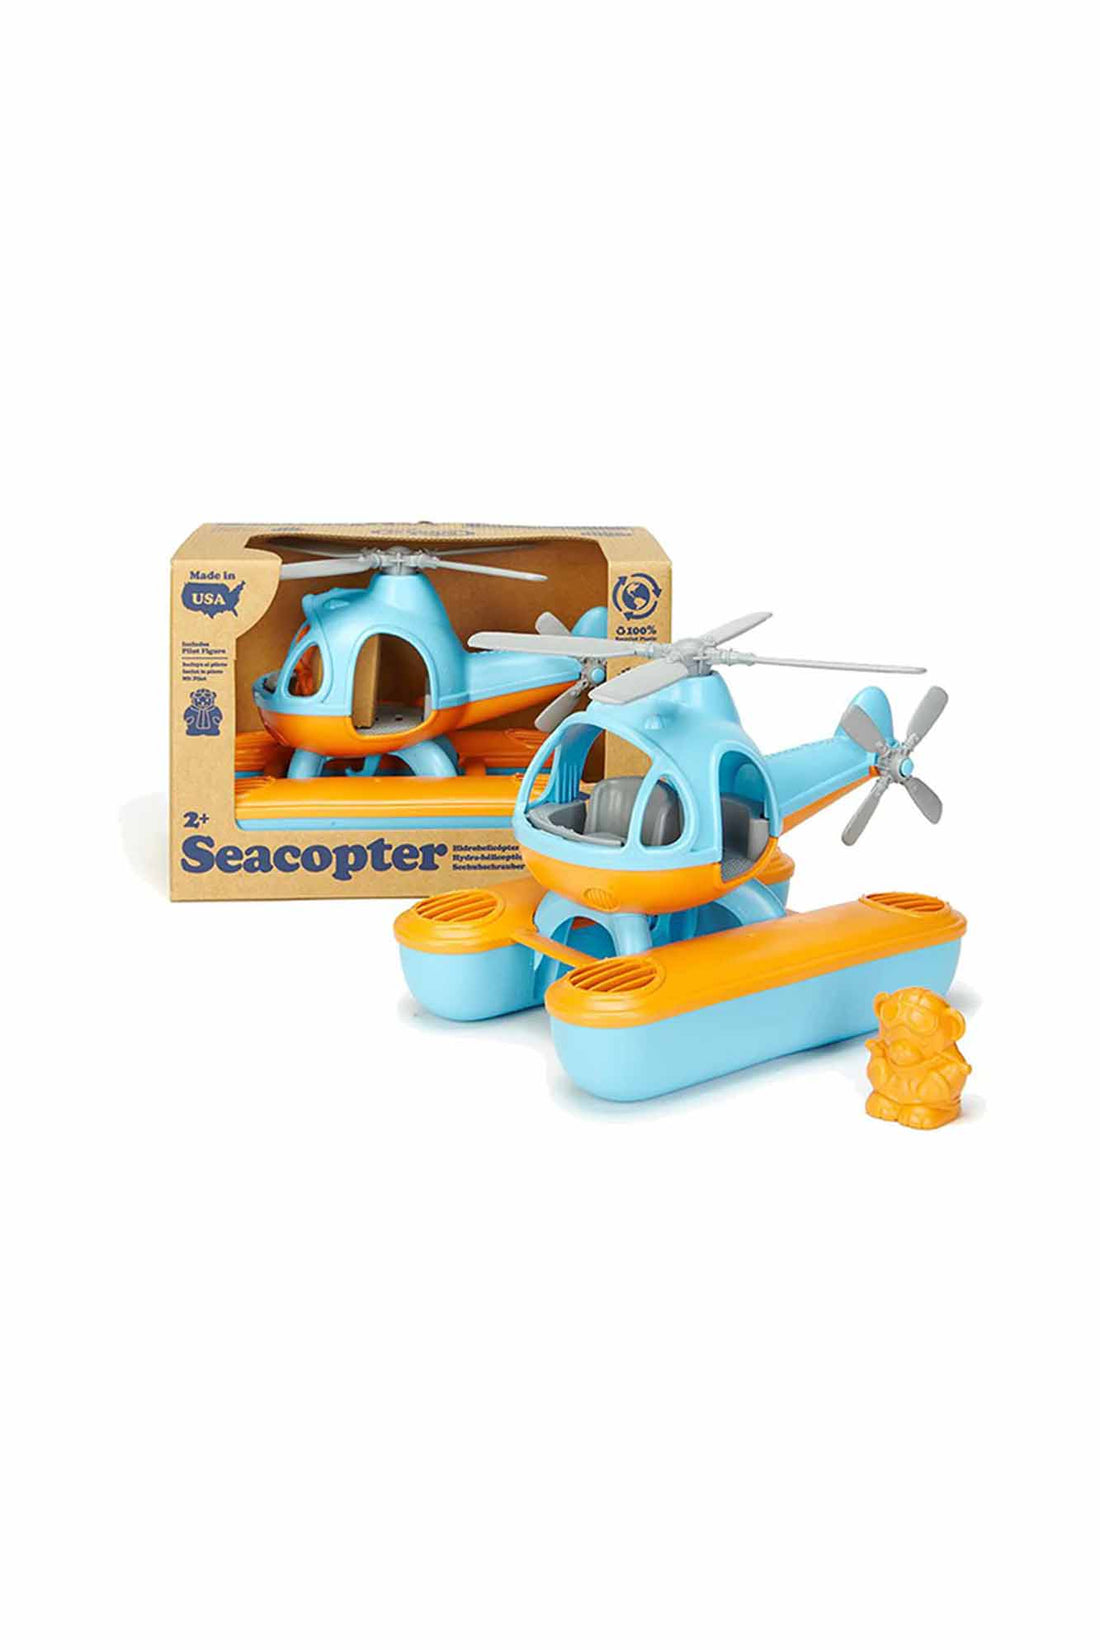 GREEN TOYS SEACOPTER BLUE